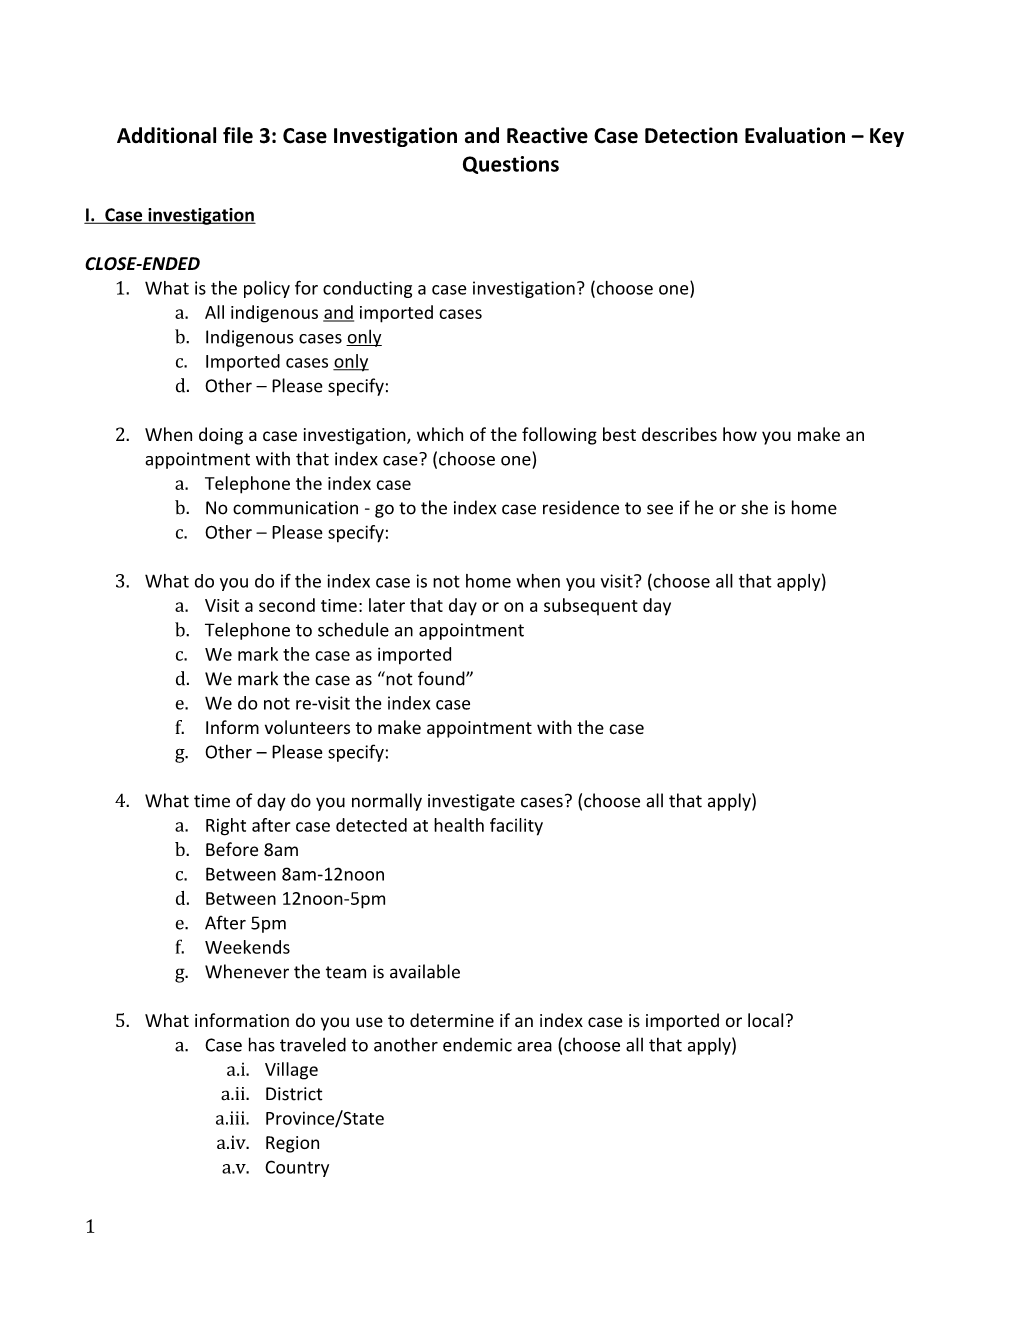 Additional File 3:Case Investigation and Reactive Case Detectionevaluation Key Questions